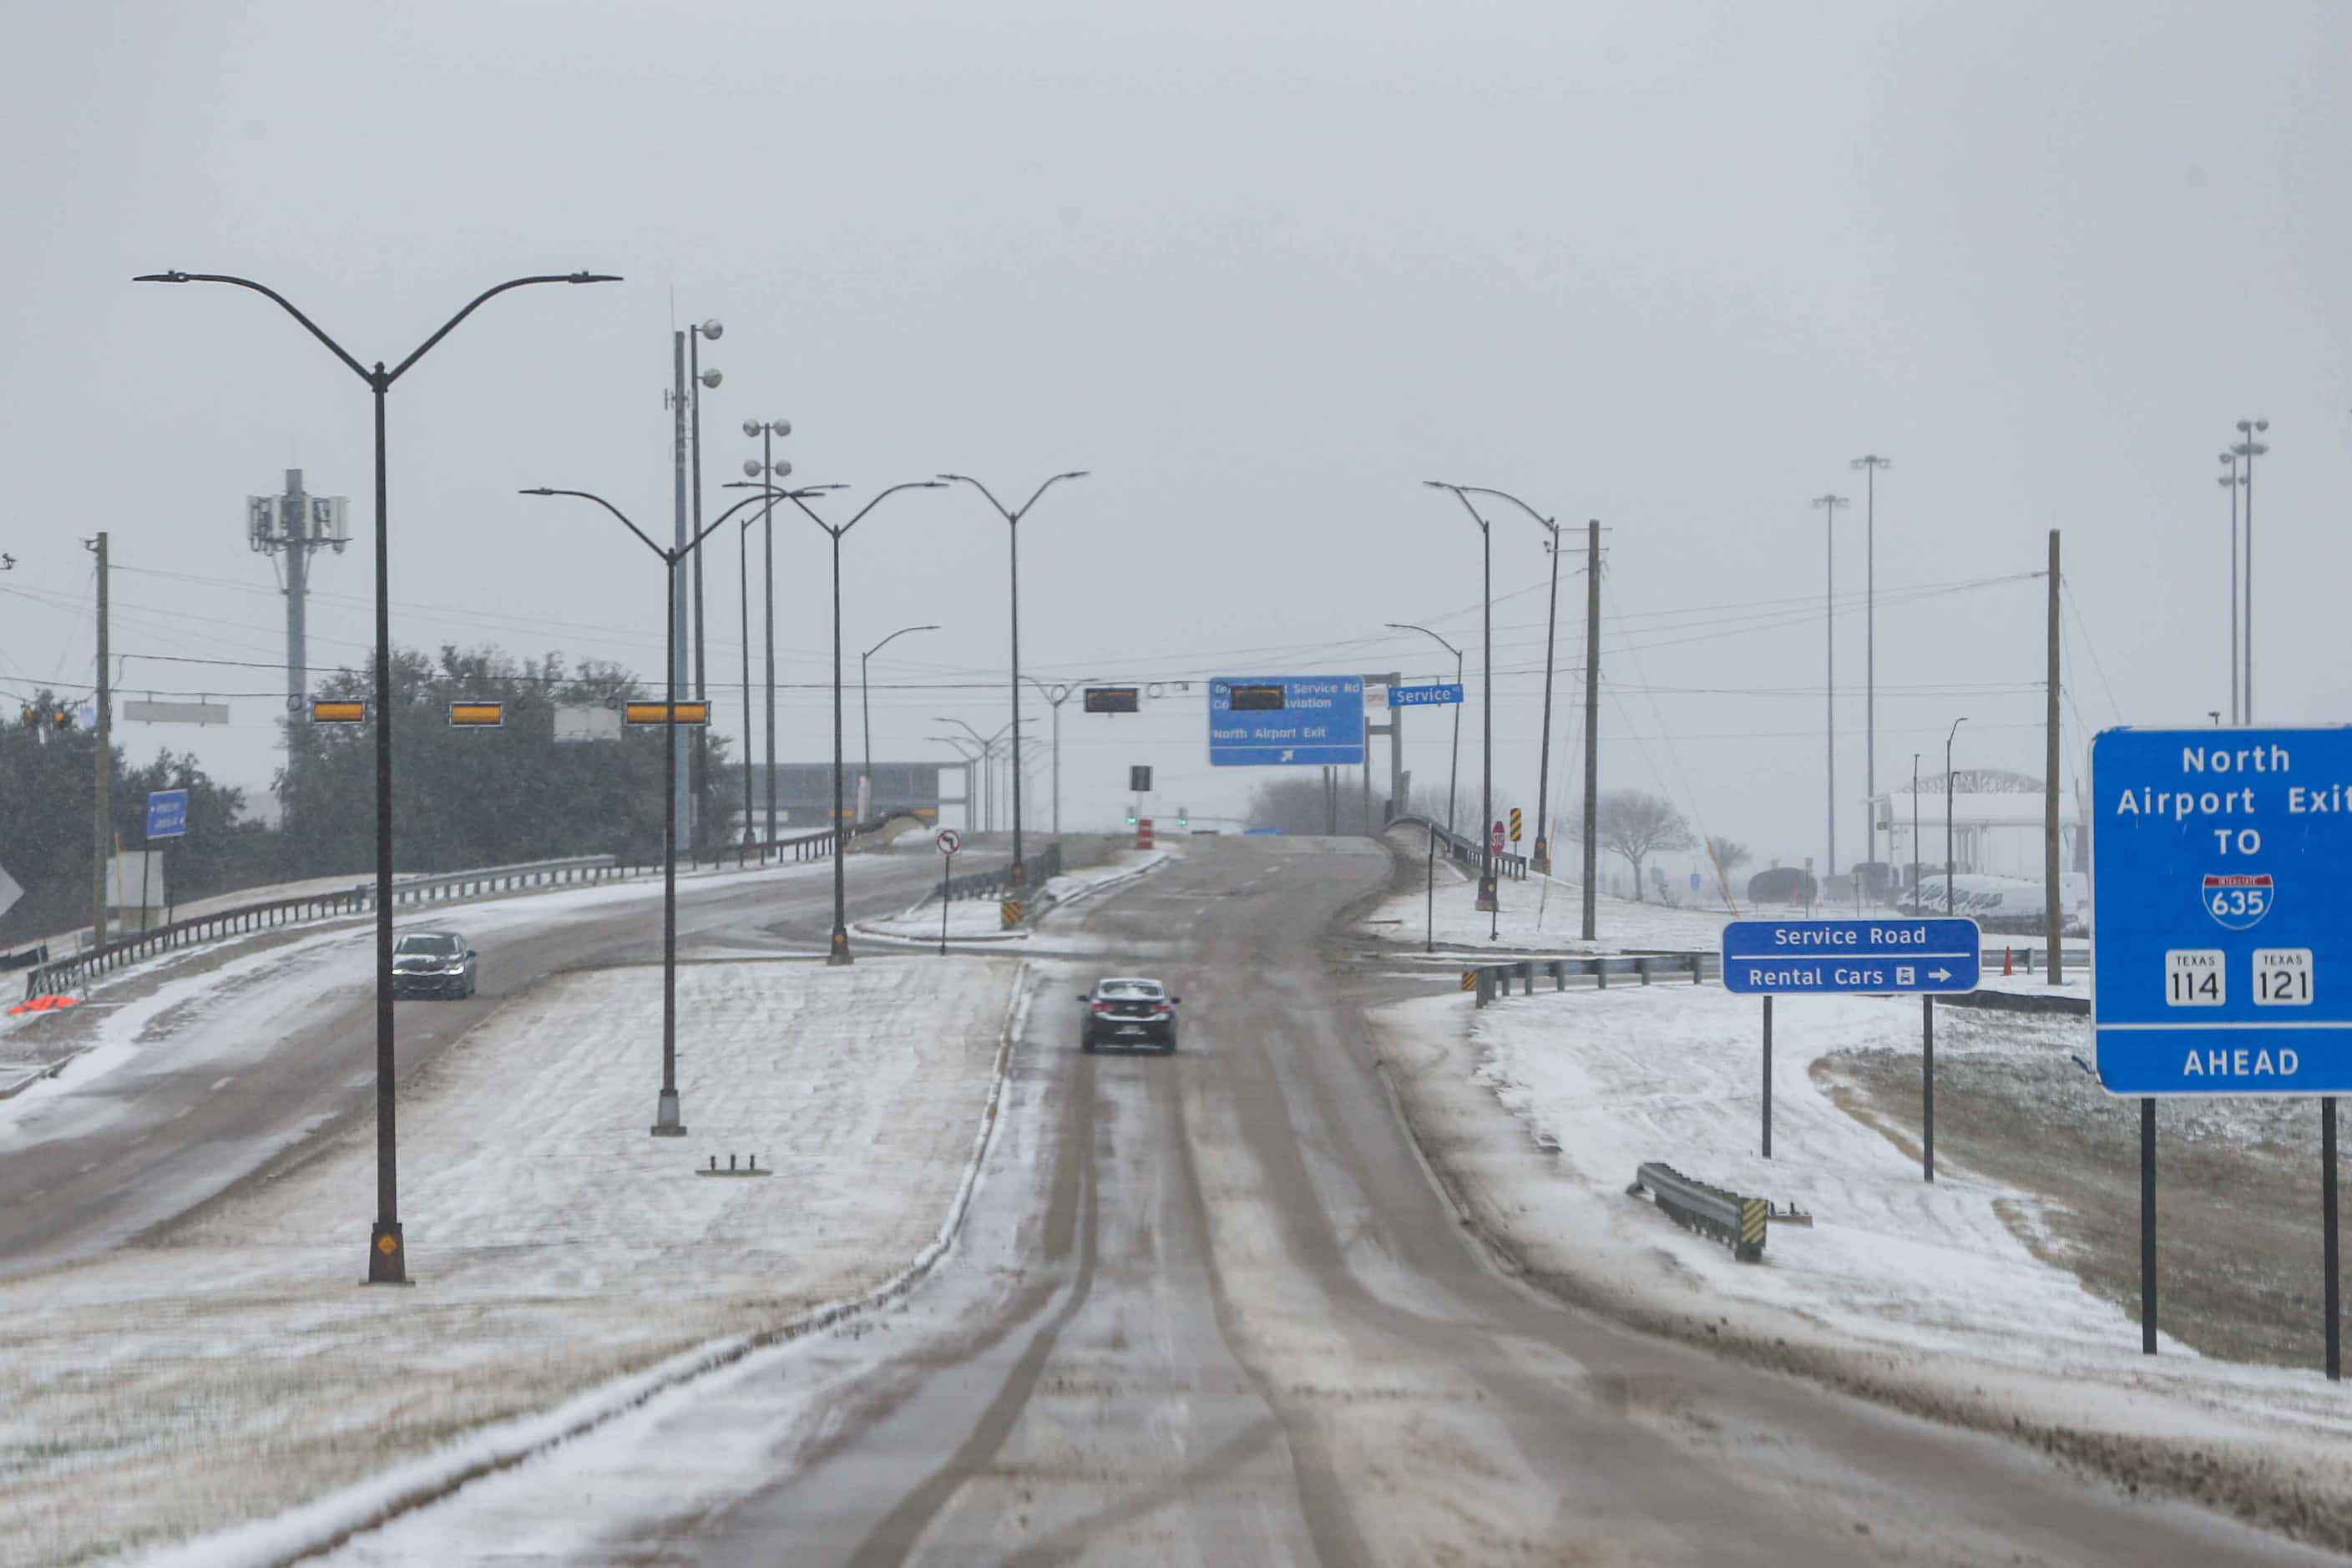 Snow and ice descend over DFW International Airport as American cancel hundreds of flights...